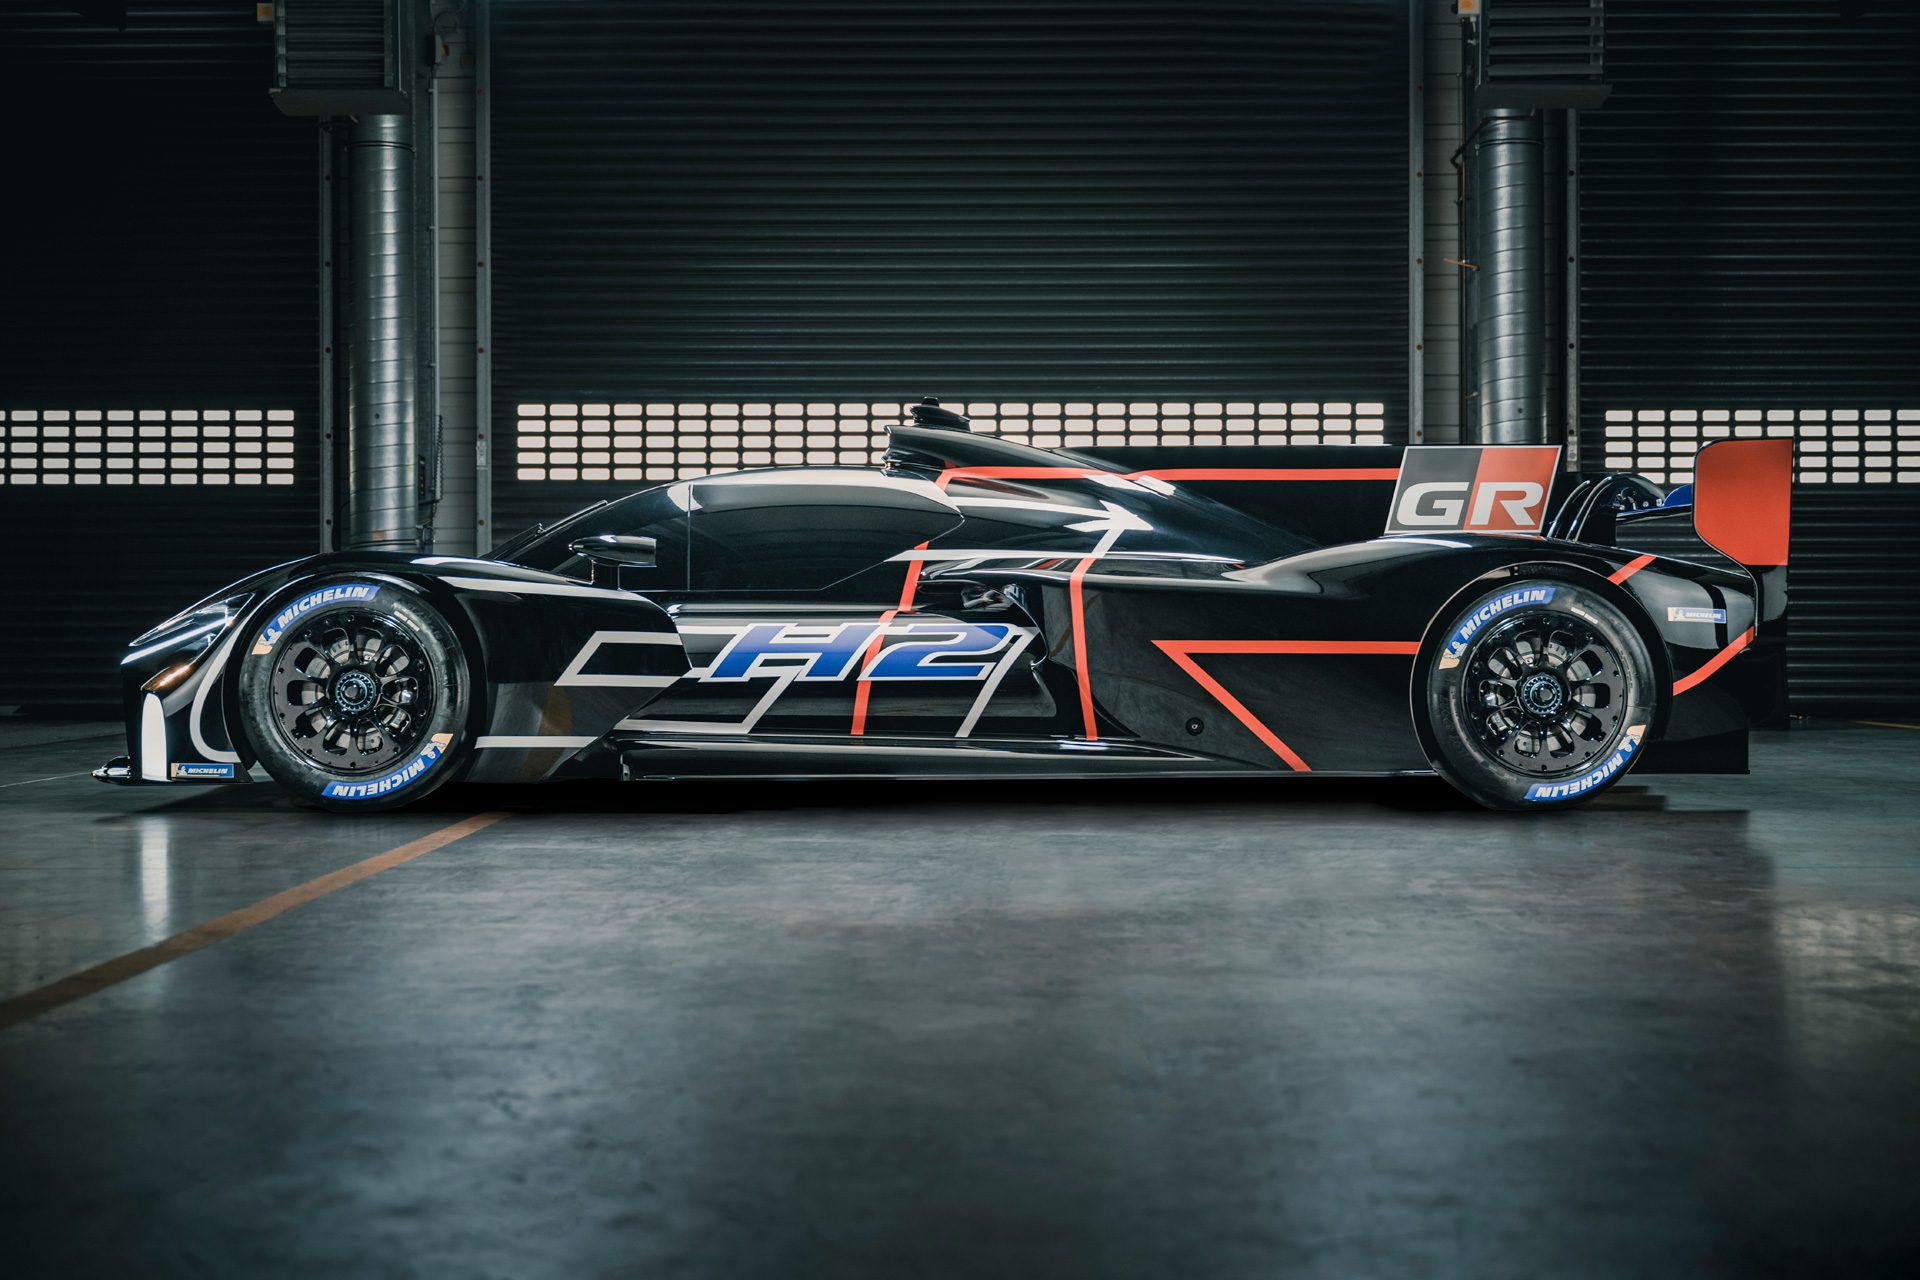 Side view of the Toyota Gazoo Racing Hydrogen Racing Concept